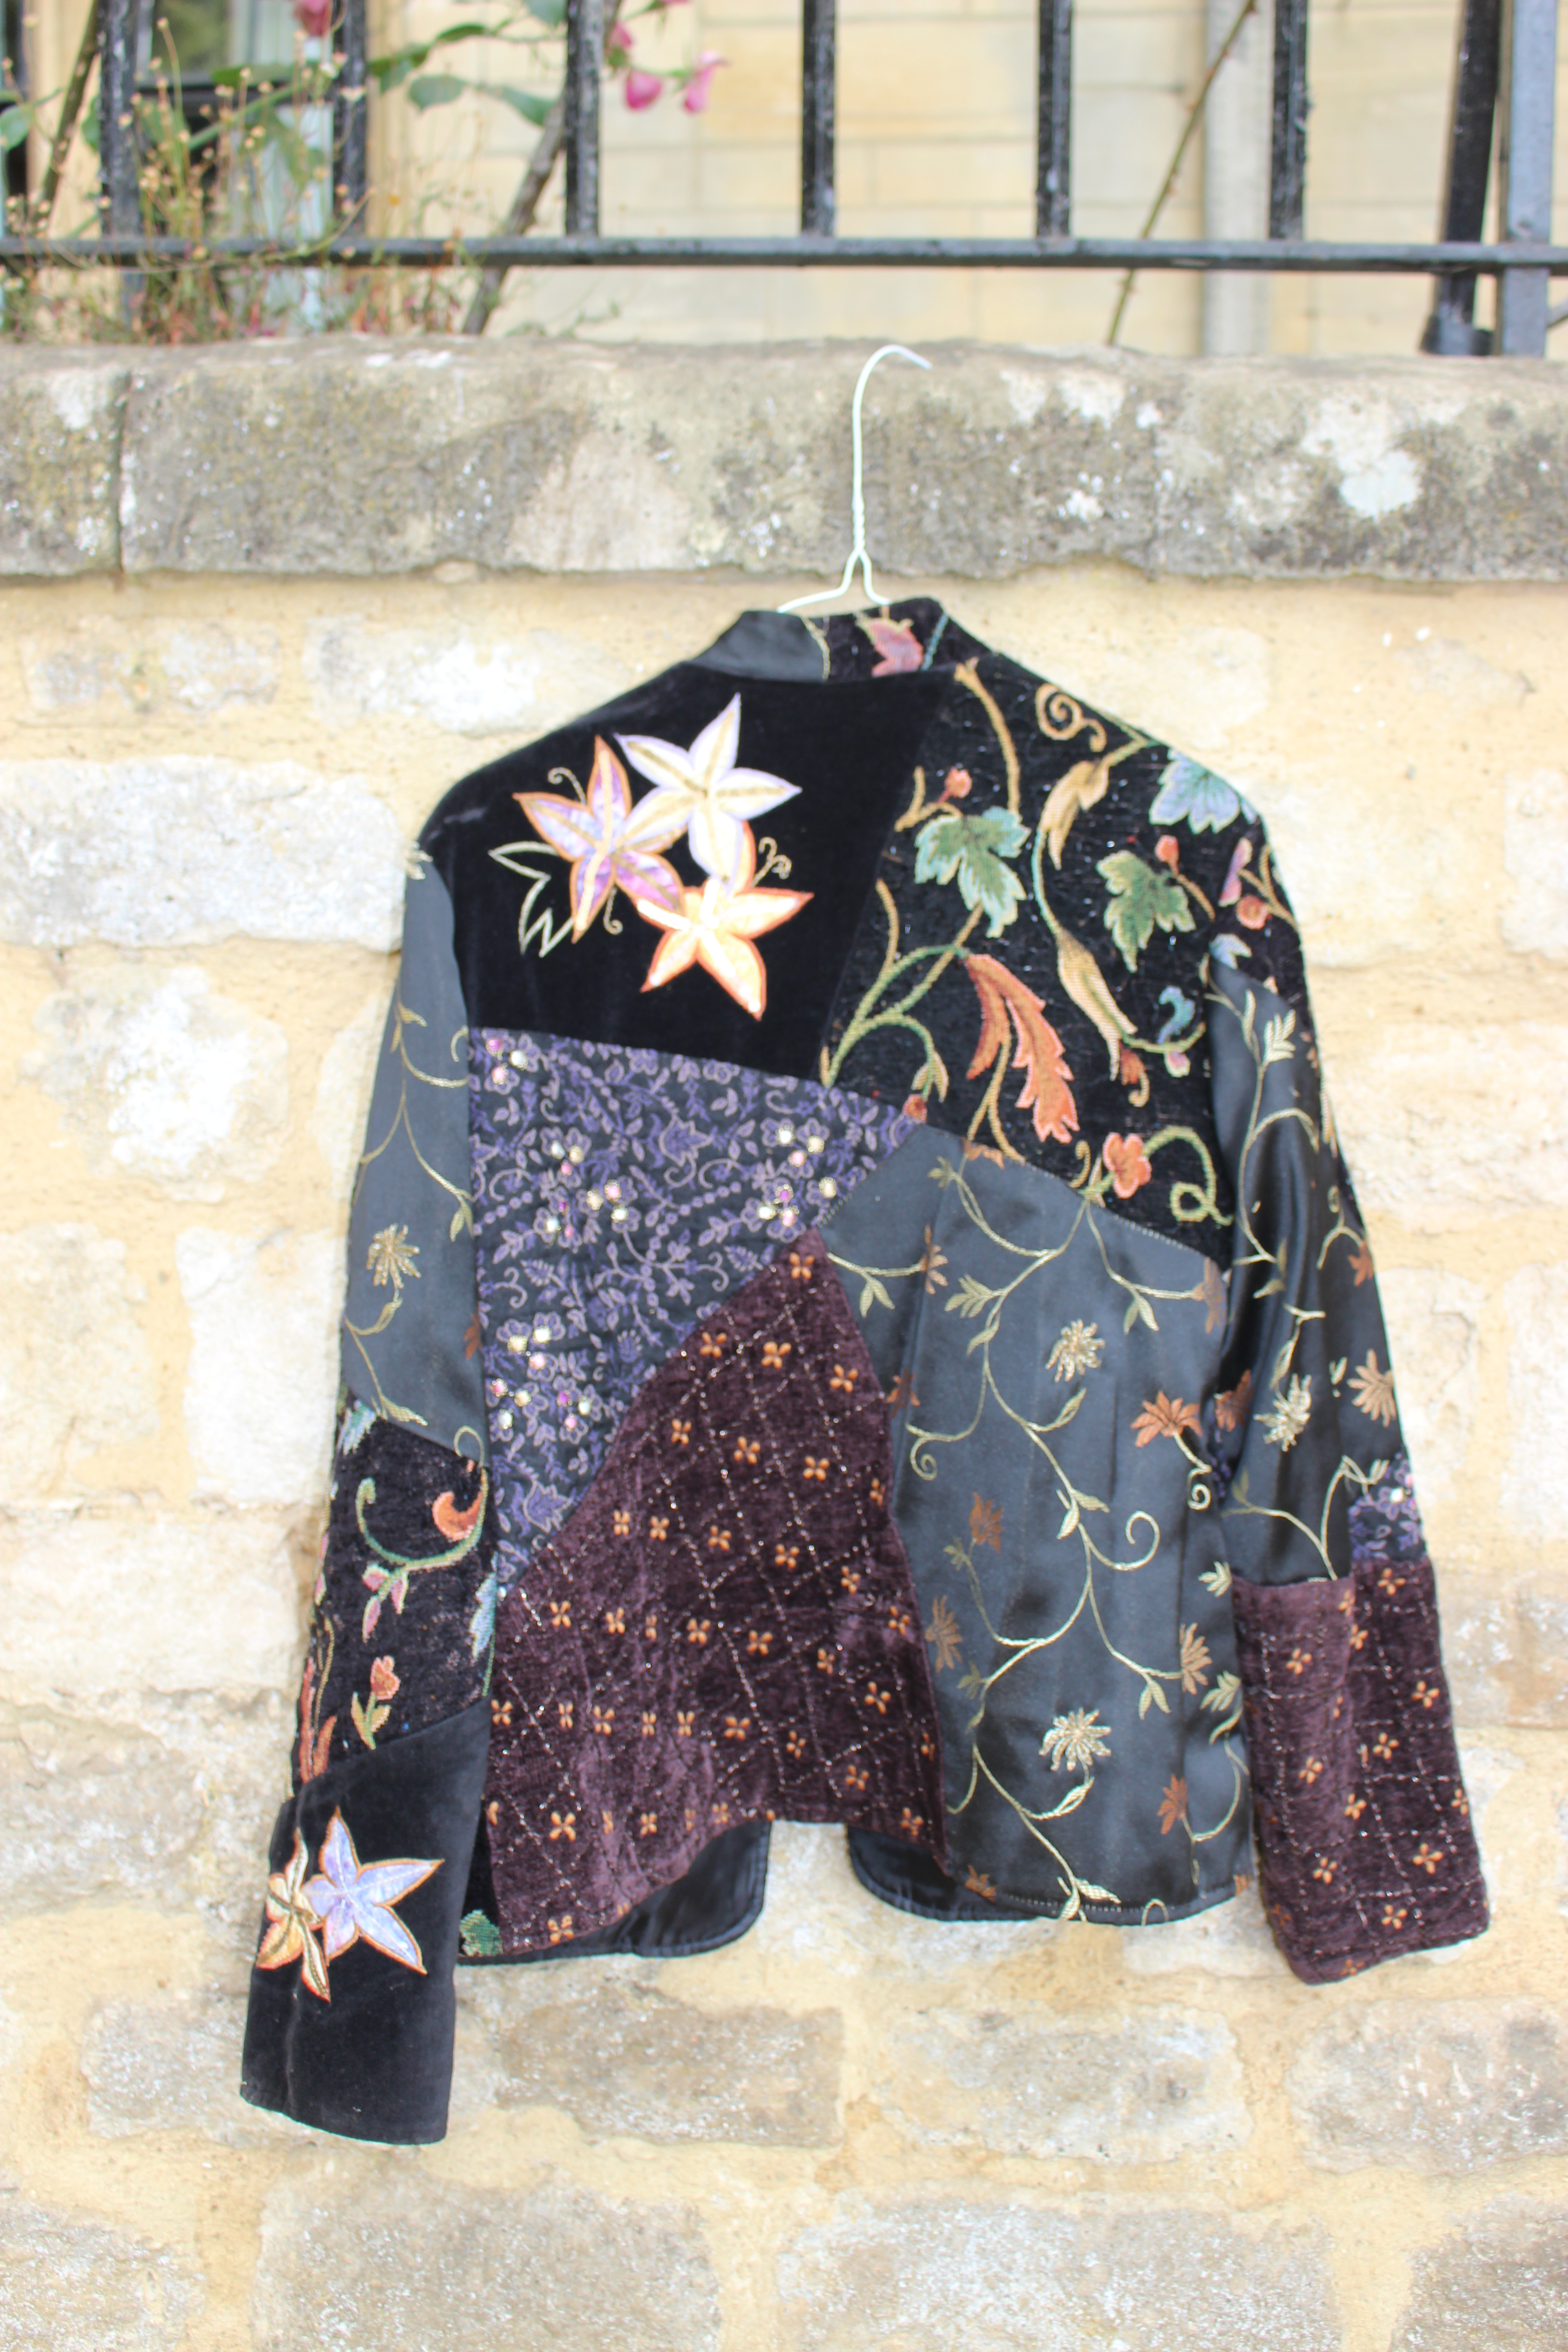 Patchwork top, from Unicorn, 5 Ship Street, Oxford